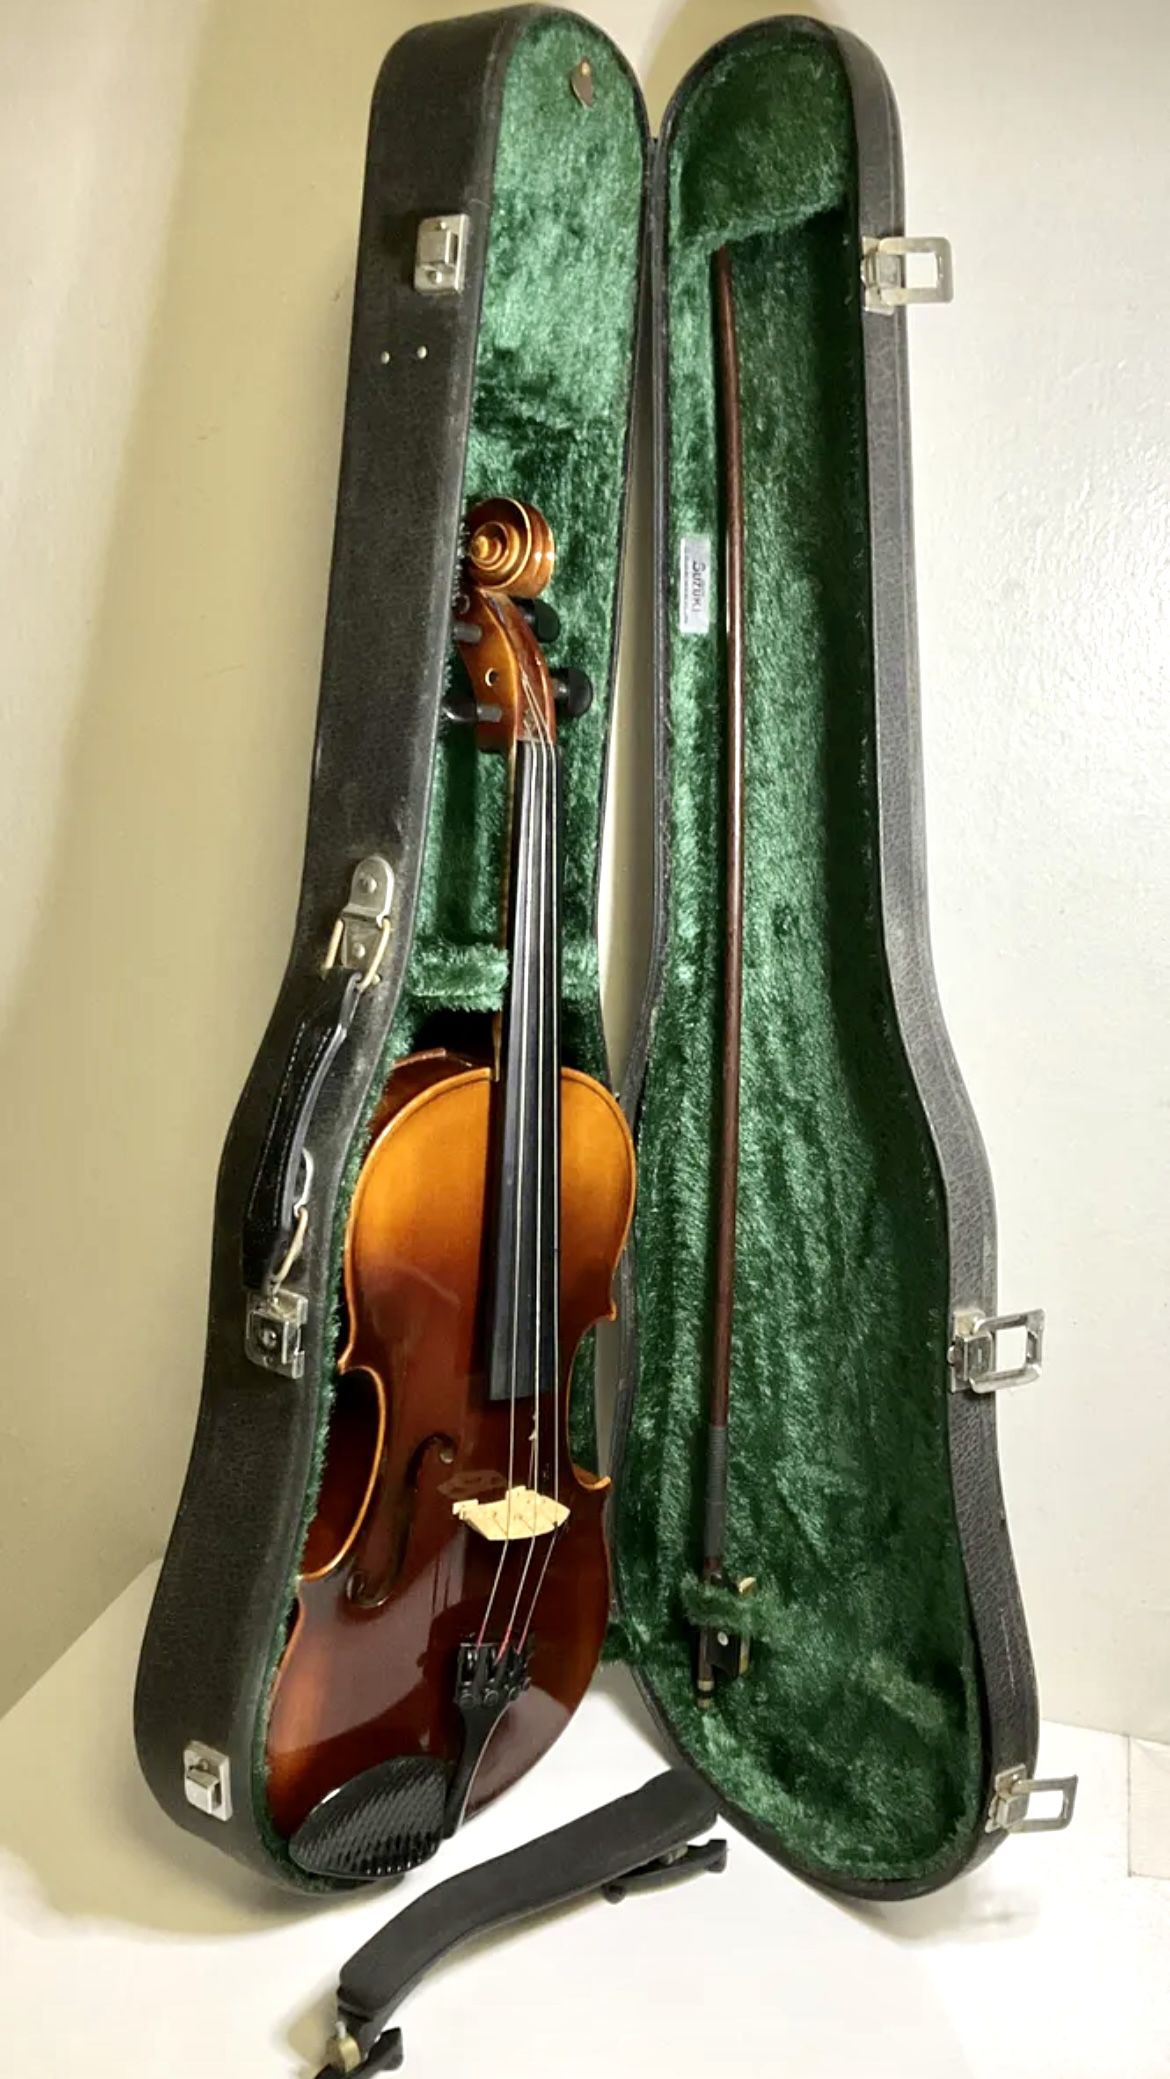 VINTAGE ANTON SCHROETTER 4/4 FULL SIZE VIOLIN WITH ORIGINAL BOW & CASE MORE